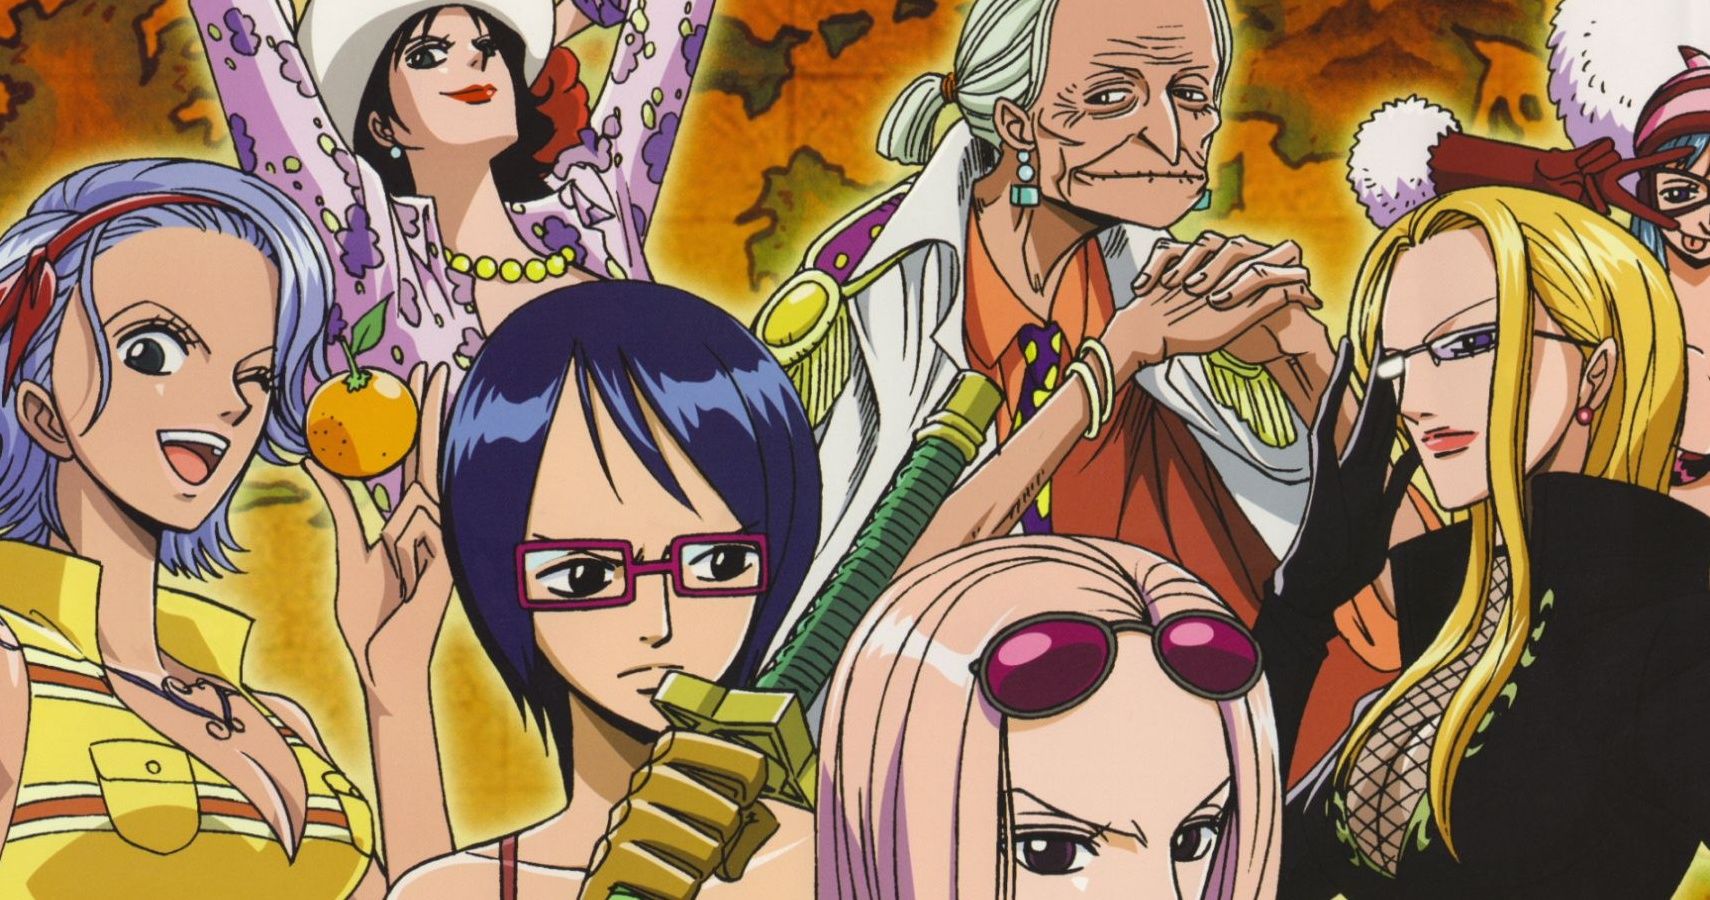 One Piece Female Characters: Here are the Top 20 - Mugiwara Media